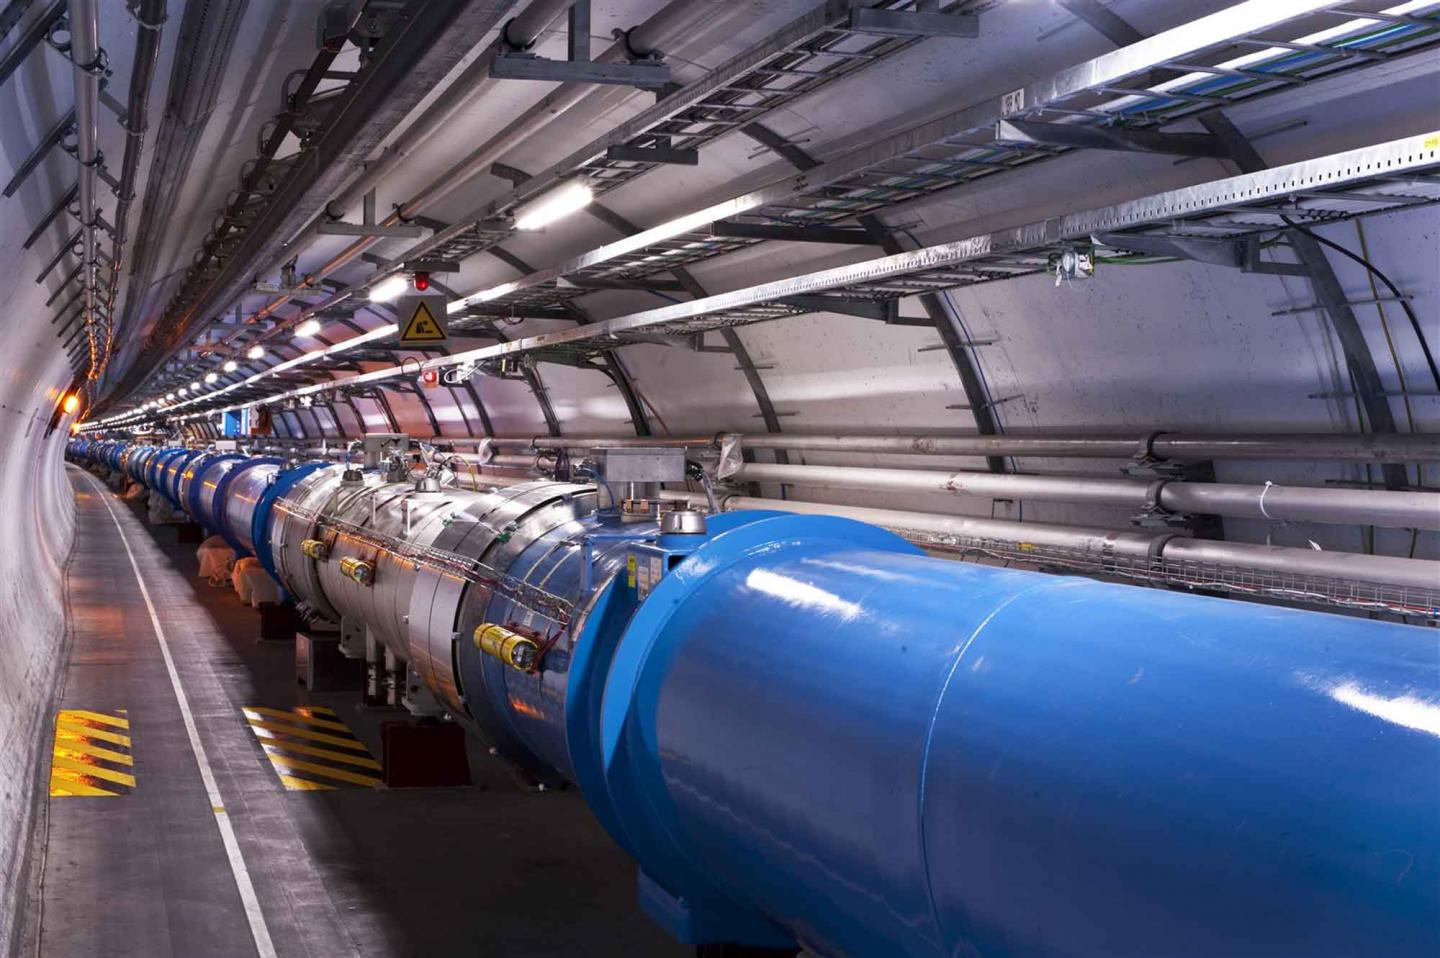 CERN releases photos under a Creative Commons licence